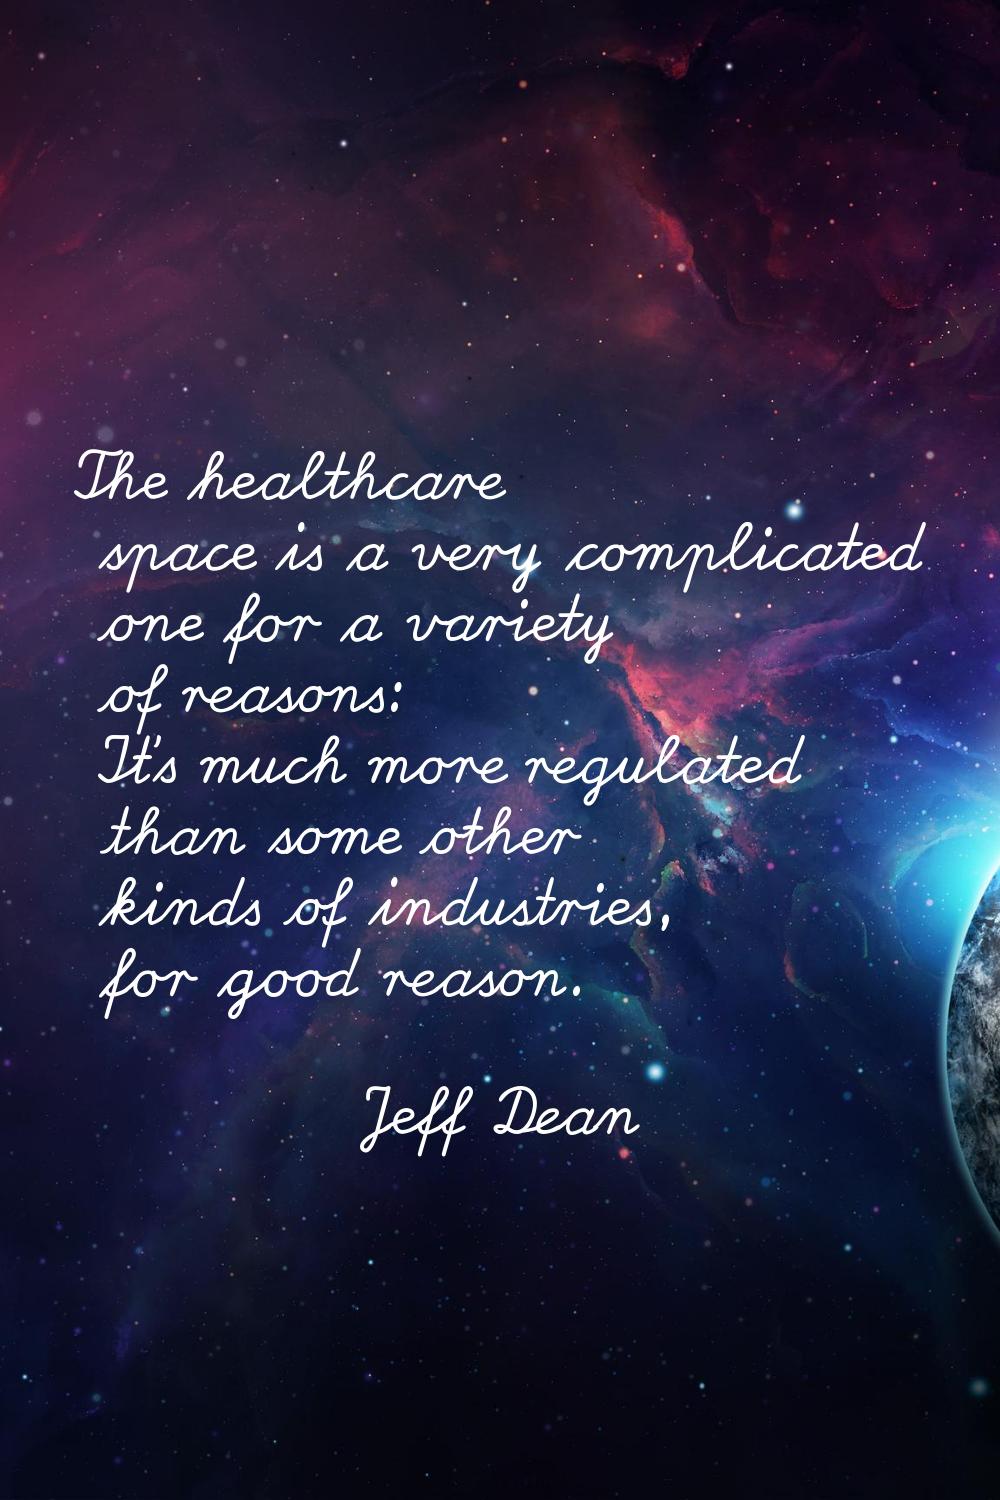 The healthcare space is a very complicated one for a variety of reasons: It's much more regulated t